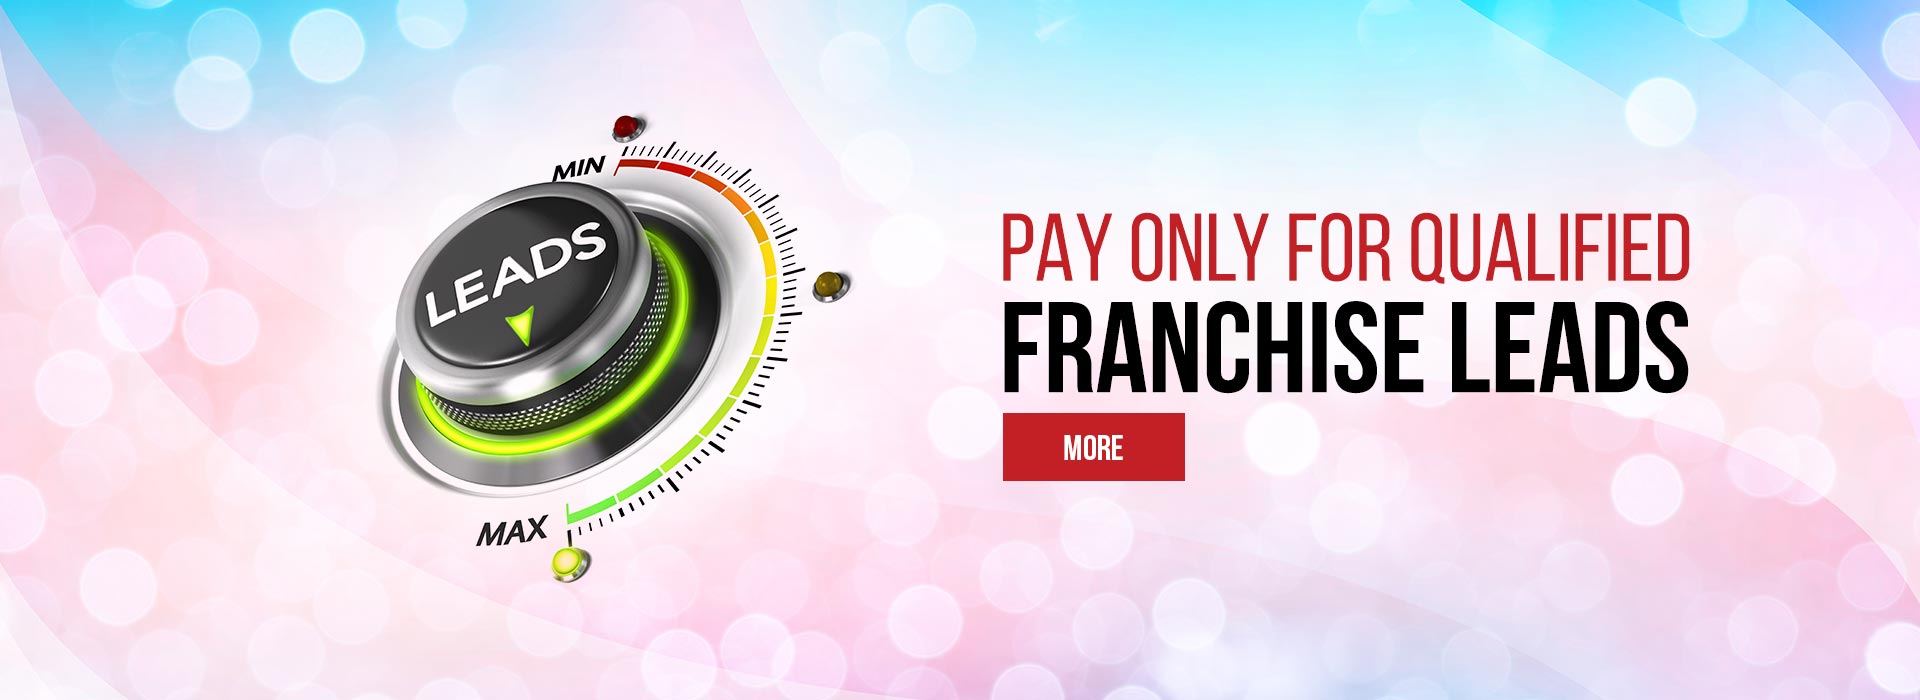 Pay for Qualified Franchise Leads